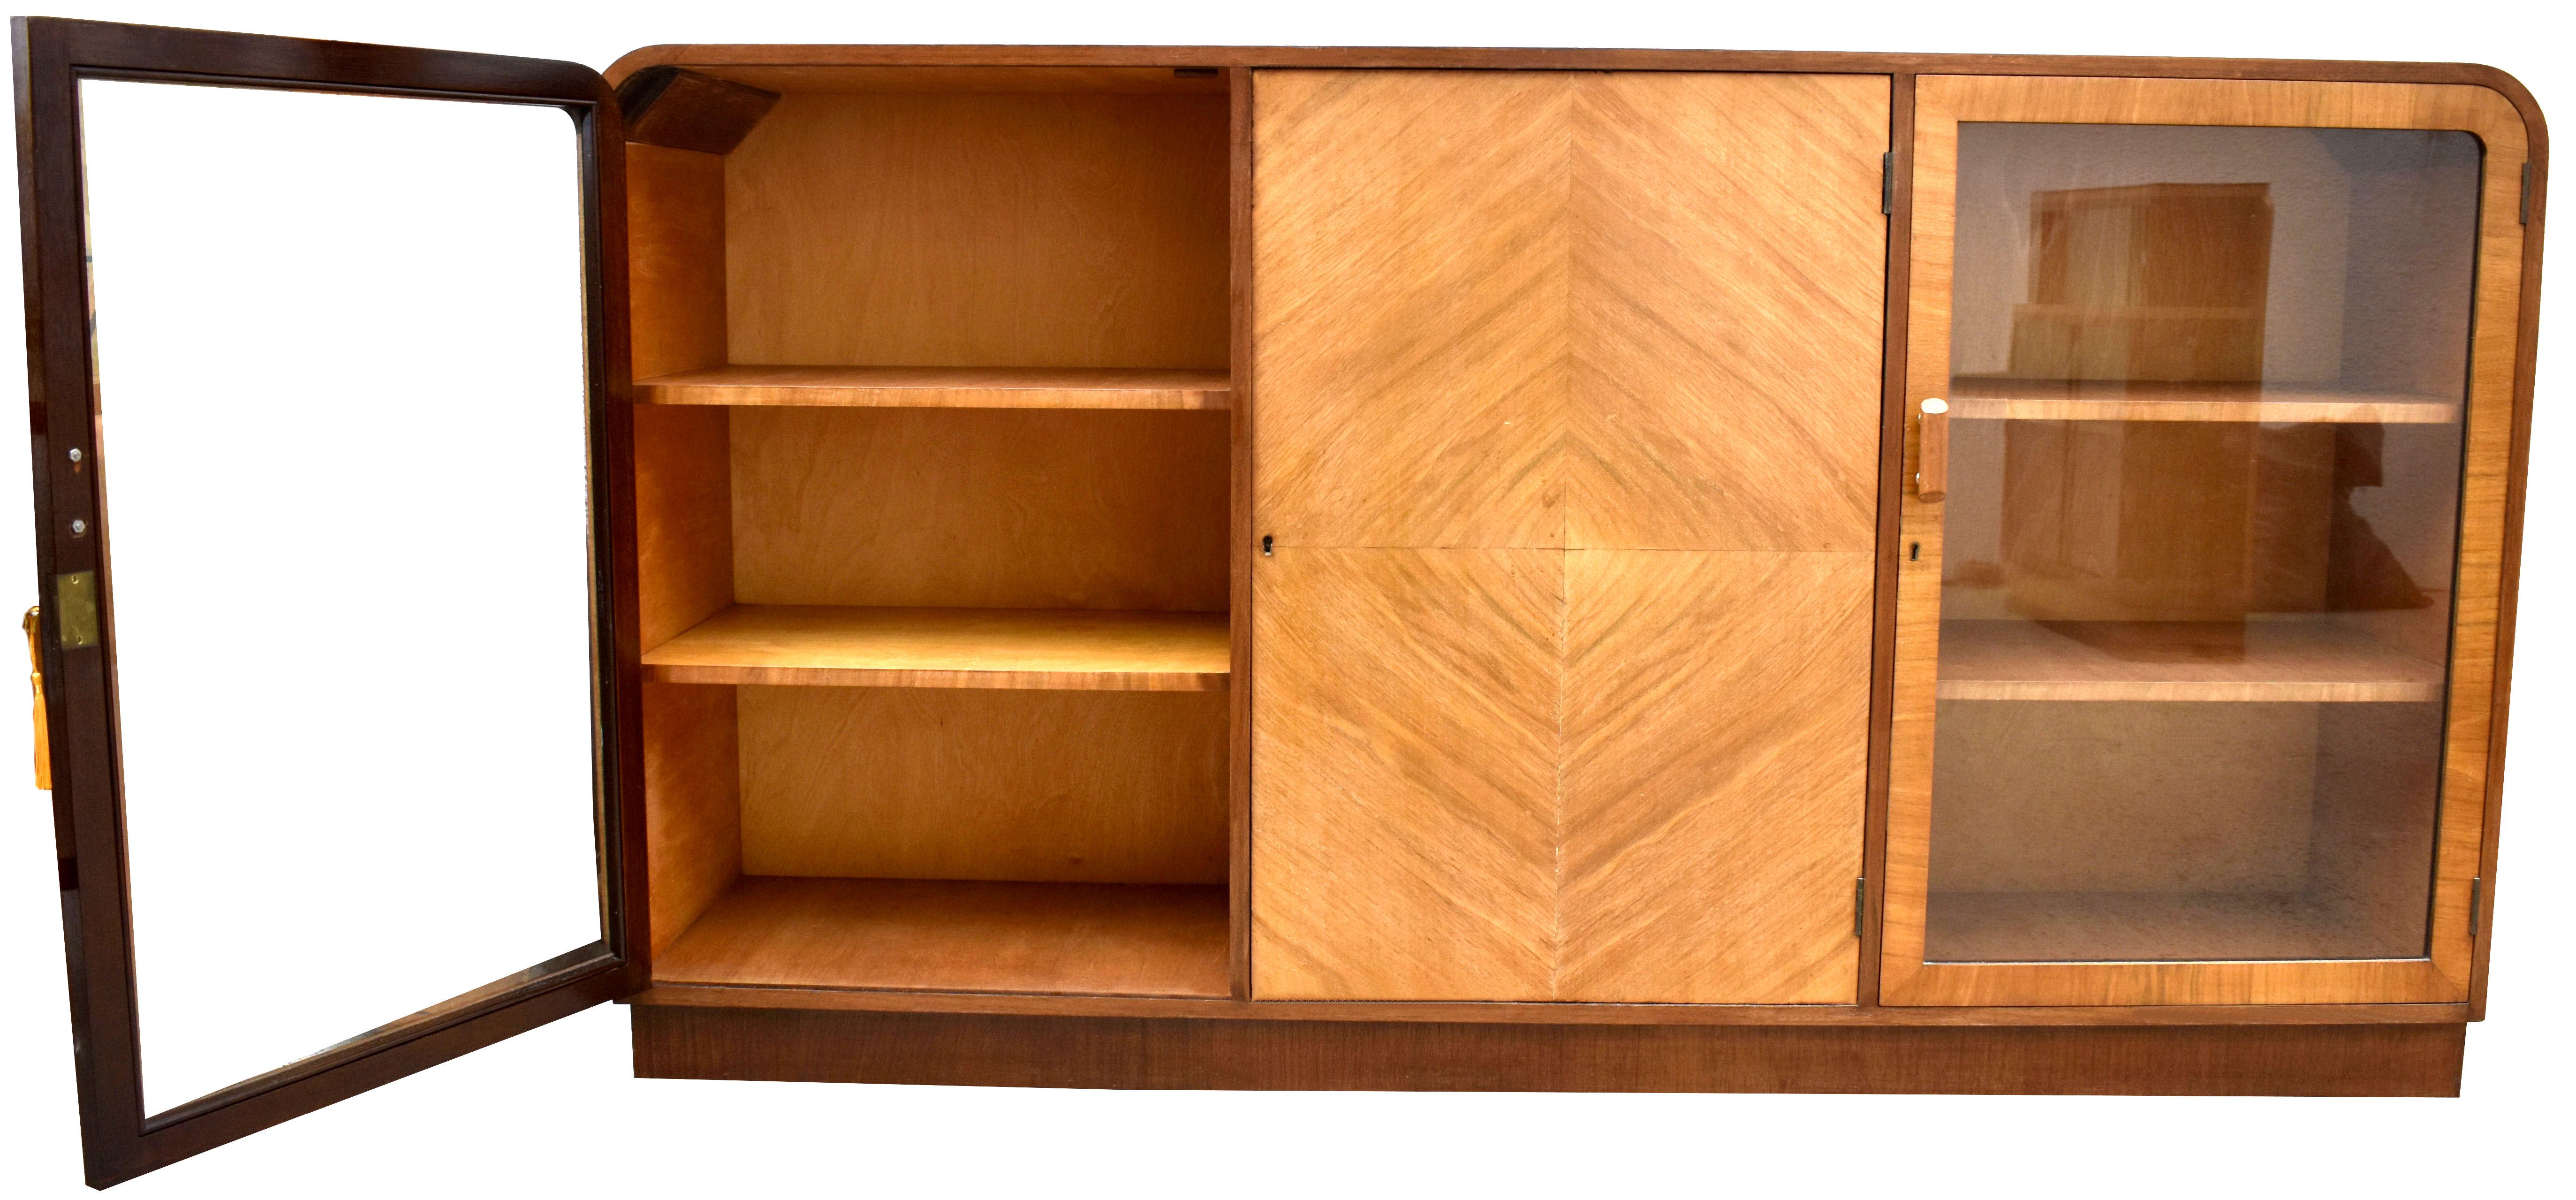 For your consideration is this fabulous floor standing round shouldered Art Deco glazed bookcase with a modernist slant. Dating to the 1930's and English made, this bookcase has beautiful blonde sycamore veneers with accented darker walnut veneered